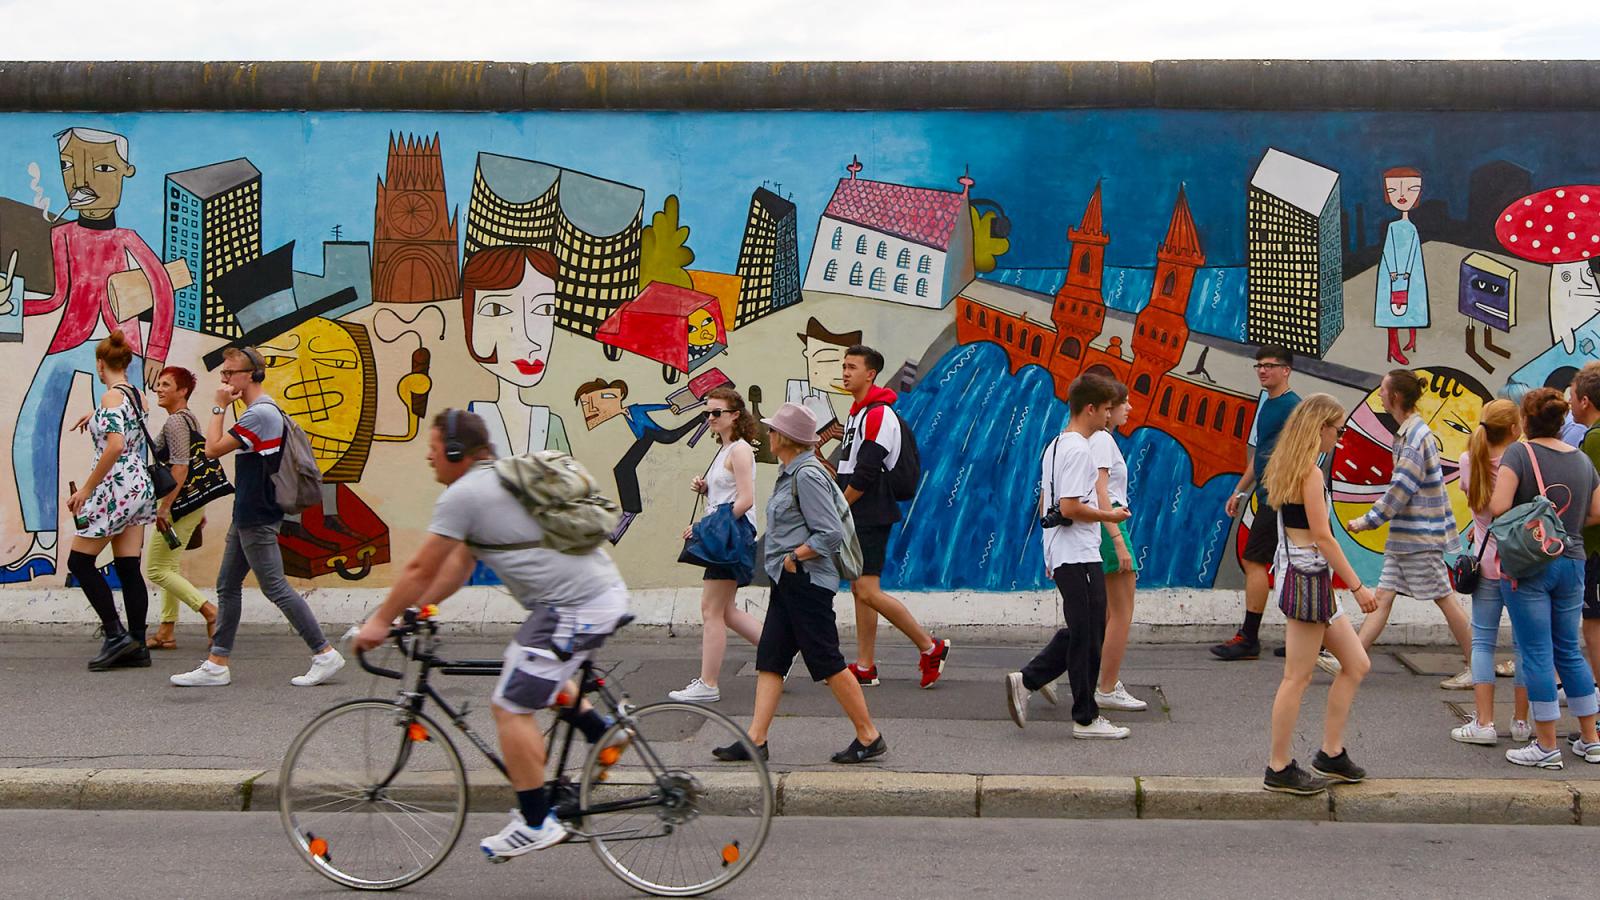 Image on the East Side Gallery